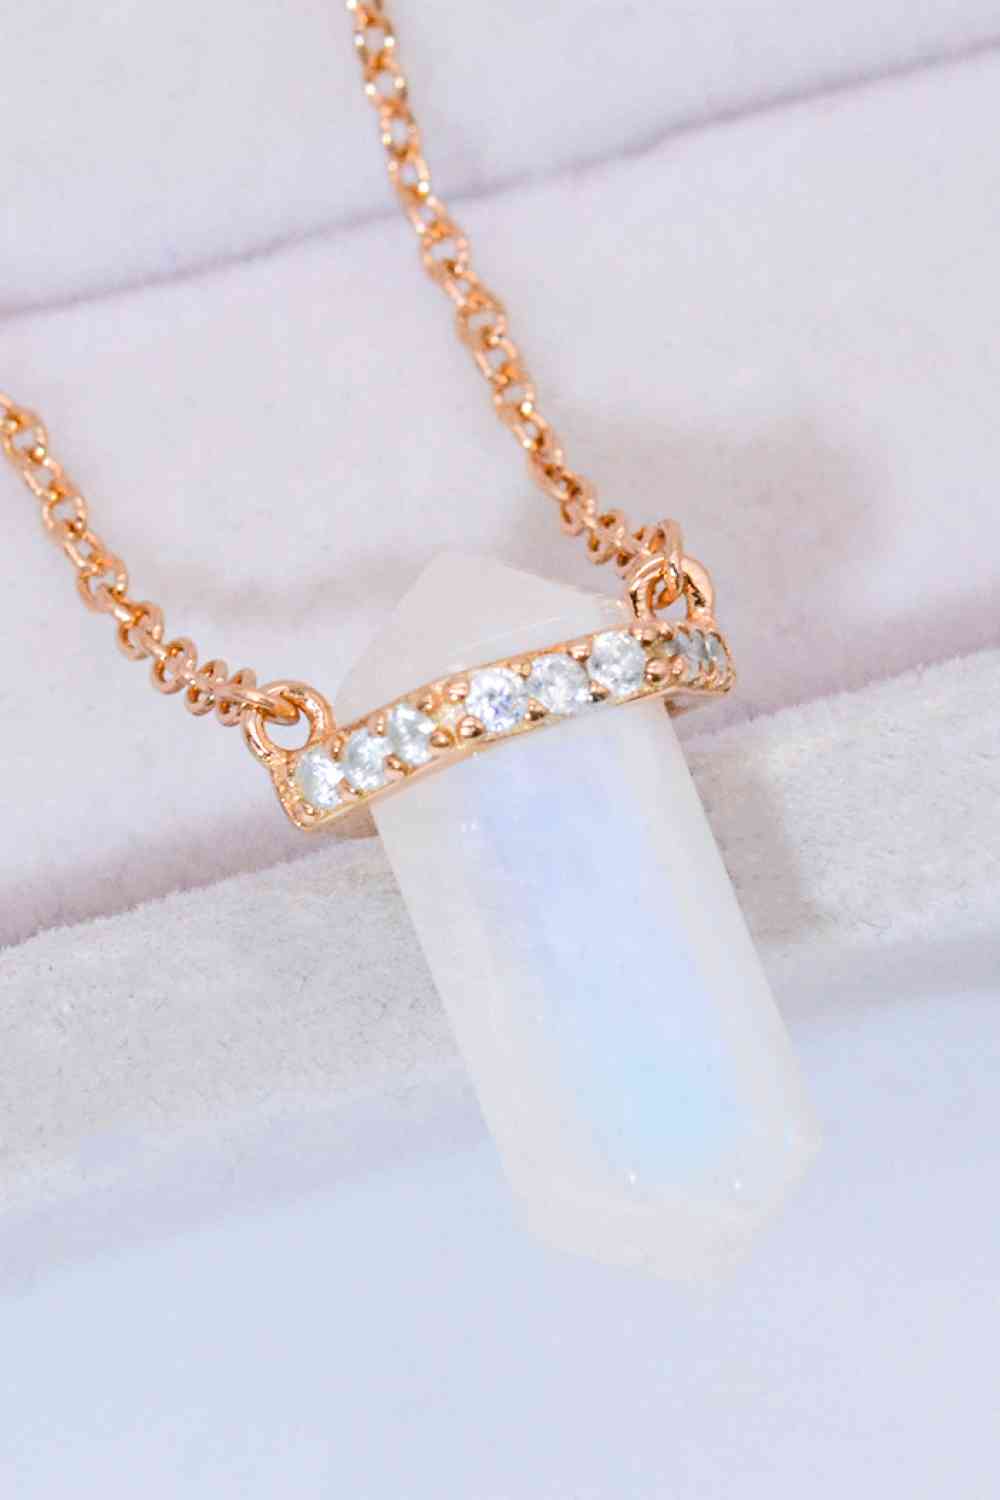 Stylish Necklace Made of Natural Moonstone, Sterling Silver or 18k Rose Gold-Plated